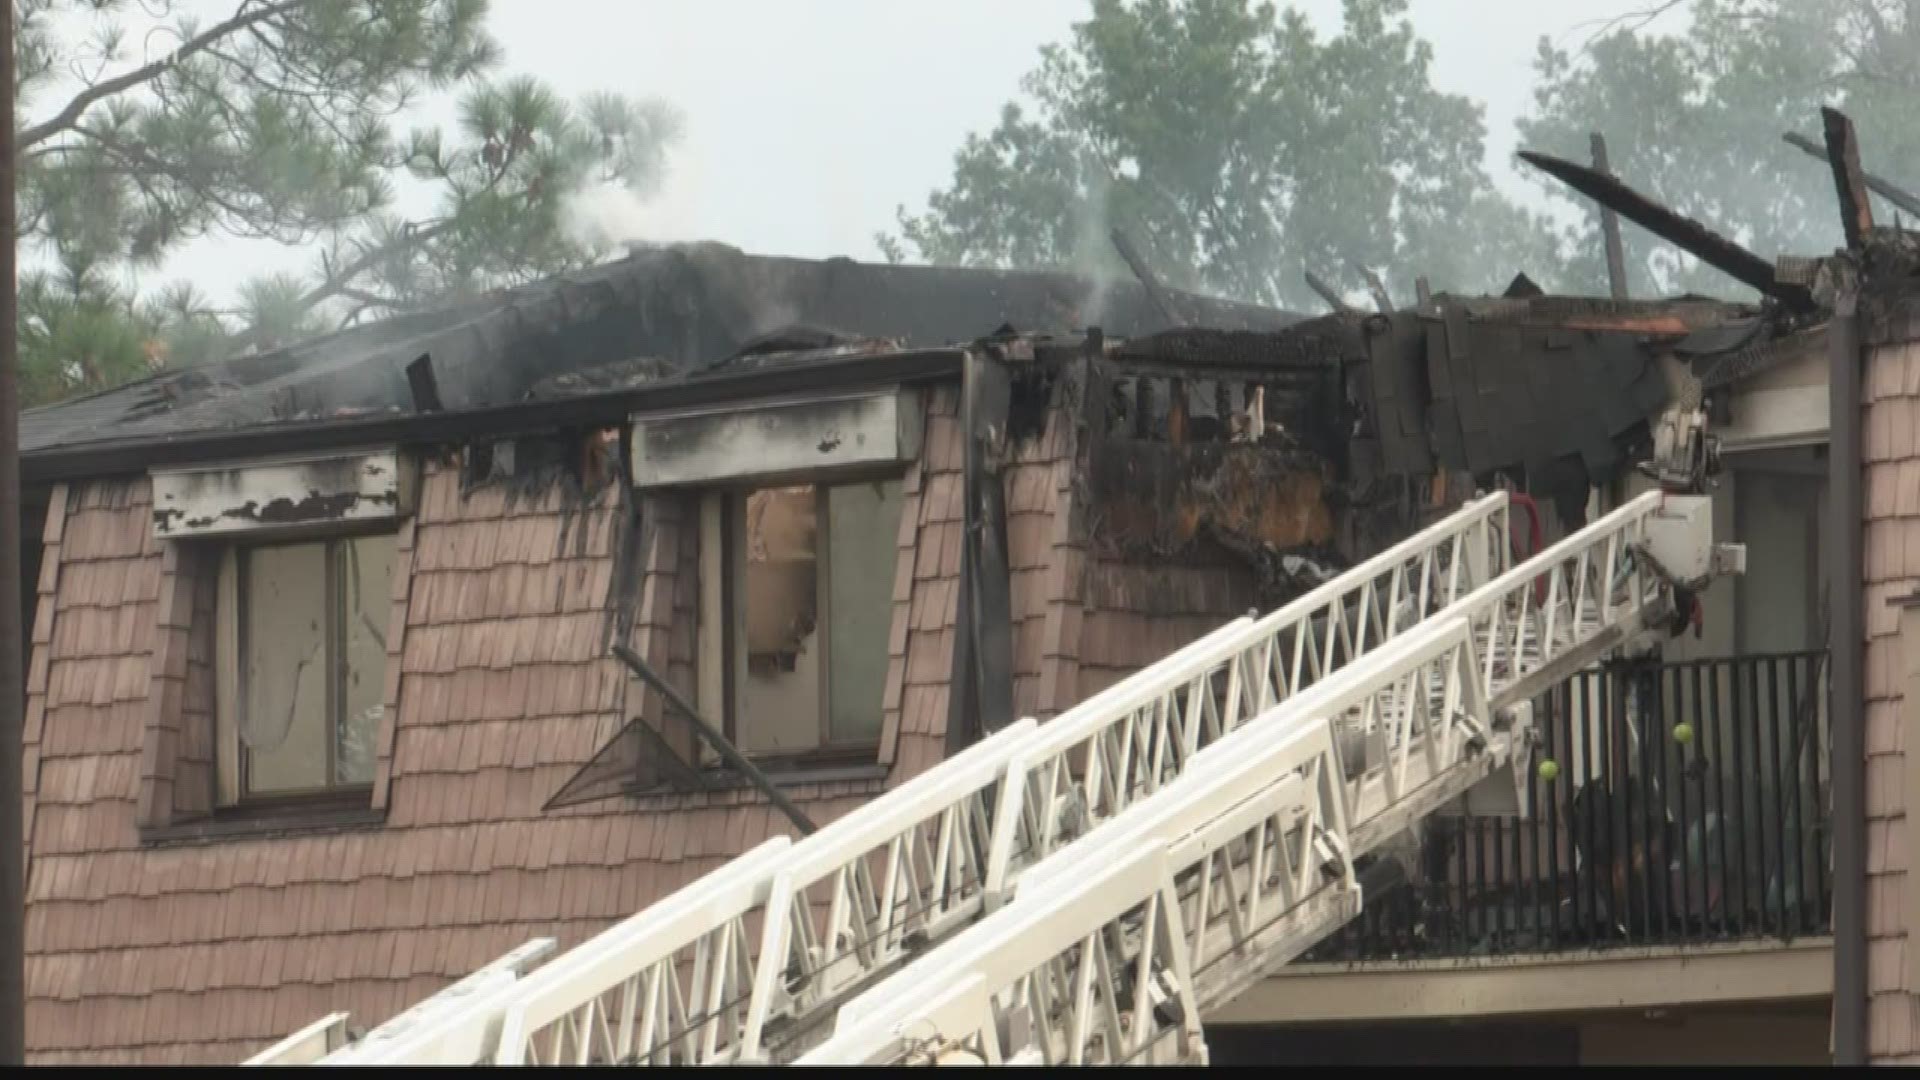 Columbia Fire Department and Irmo Fire say an early morning fire caused heavy damage at Briargate Condominiums in the St. Andrews area.